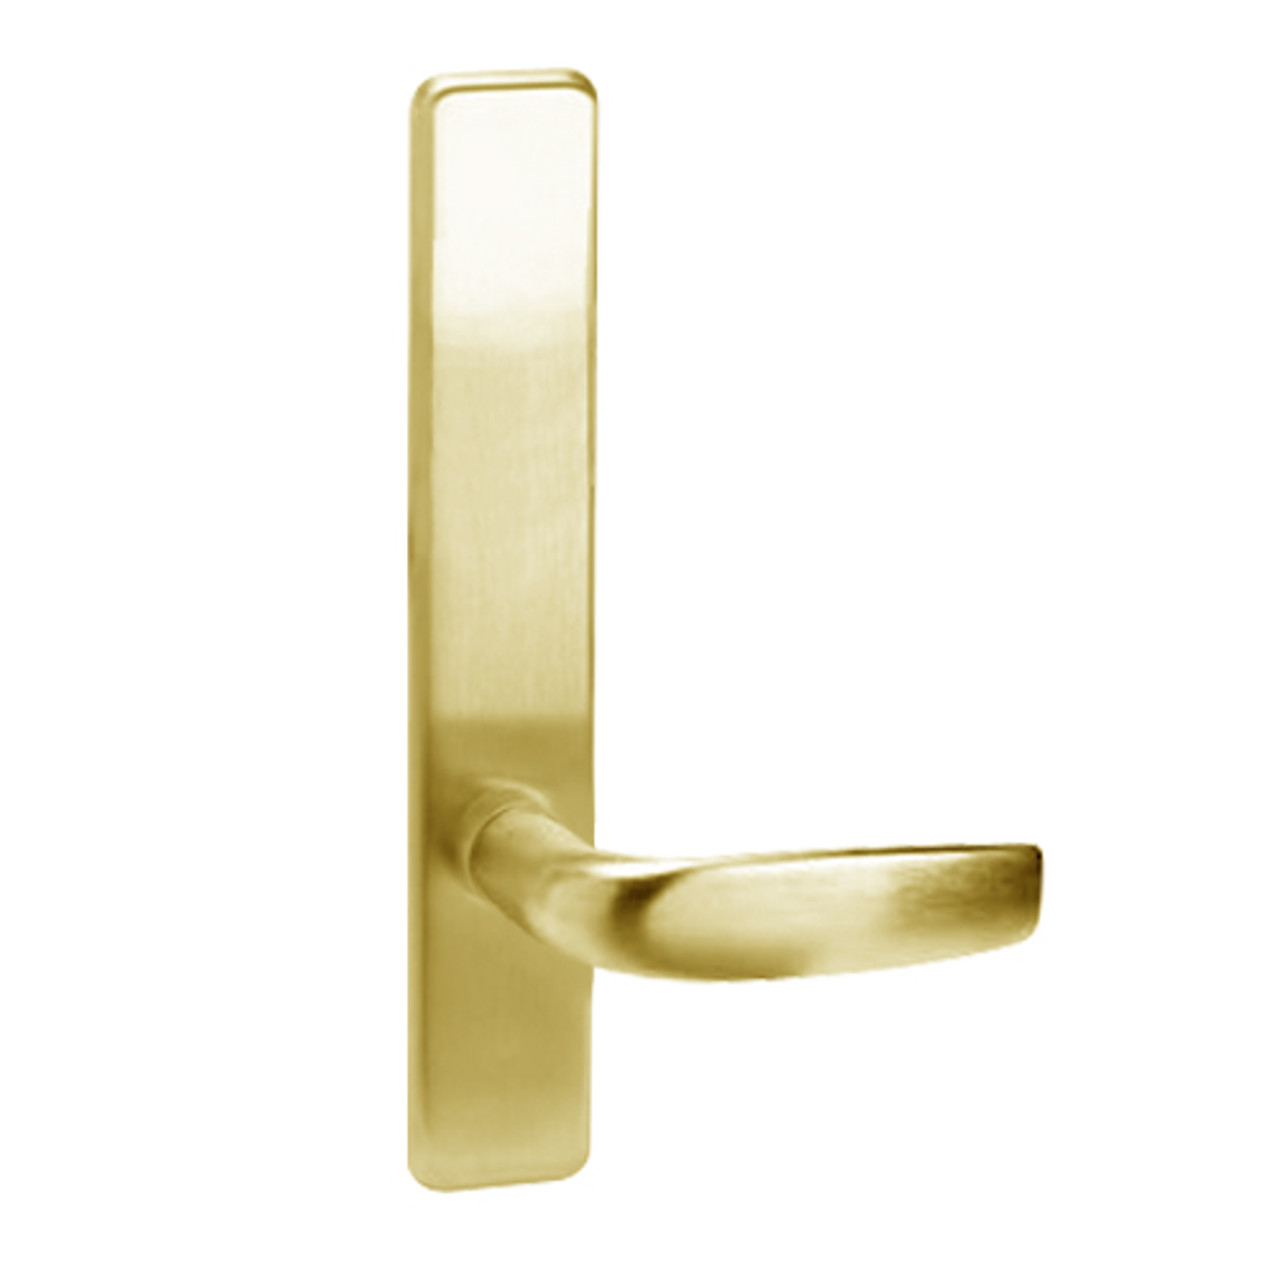 C855-605-LHR Corbin ED4000 Series Exit Device Trim with Classroom Citation Lever in Bright Brass Finish